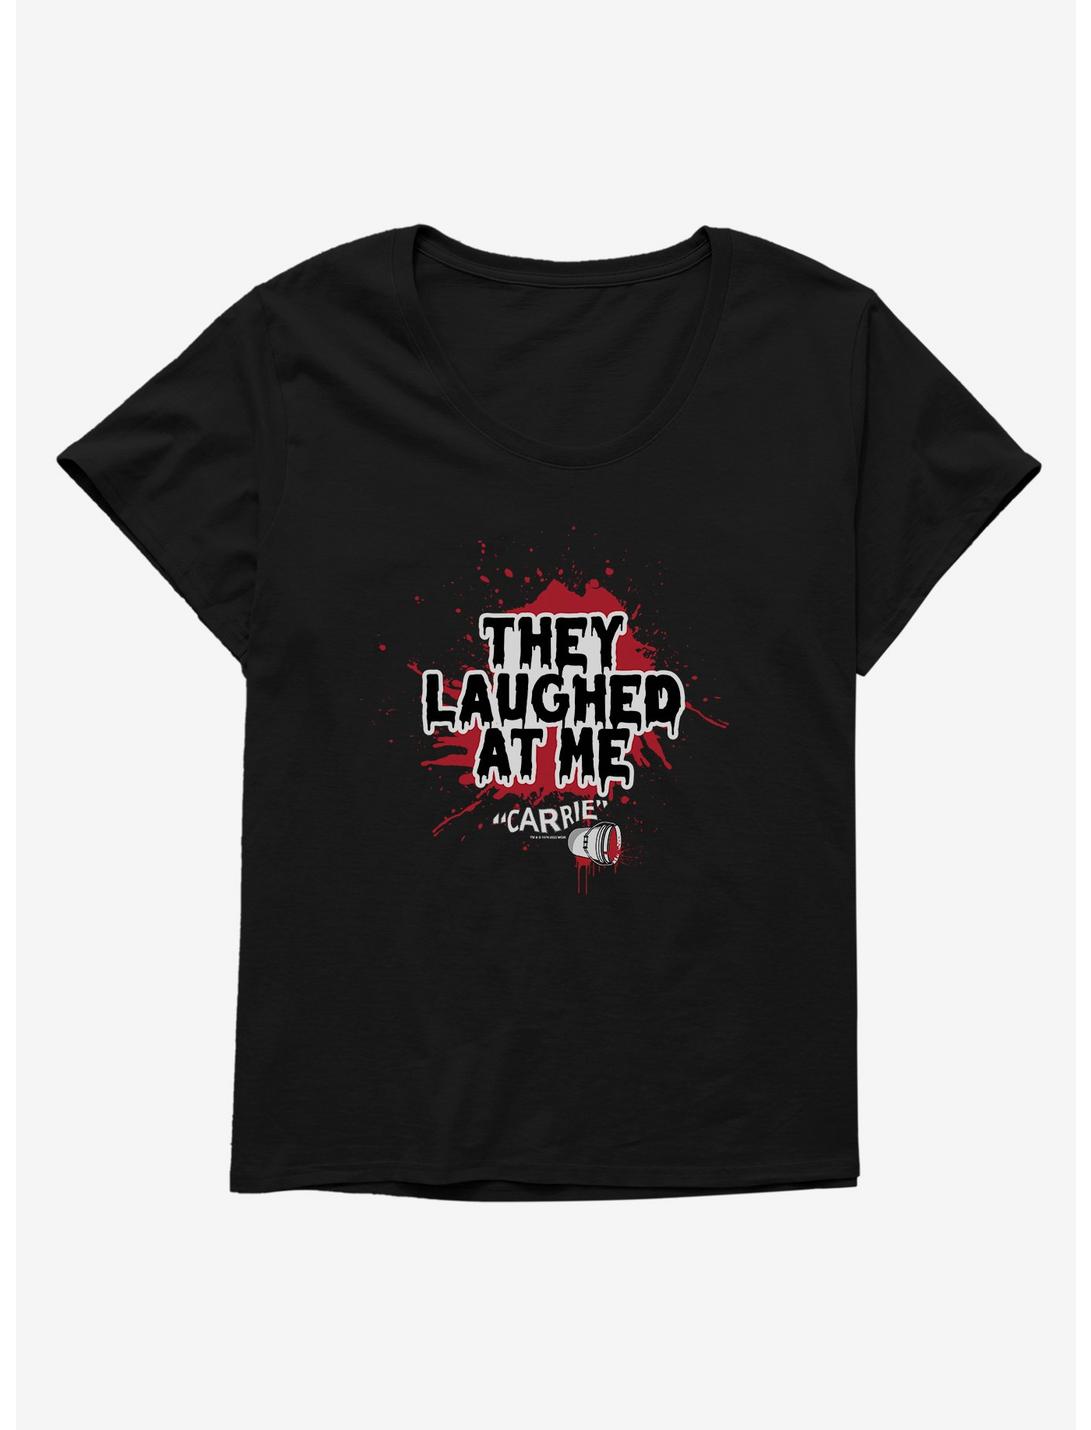 Carrie 1976 Laughed At Me Womens T-Shirt Plus Size, BLACK, hi-res